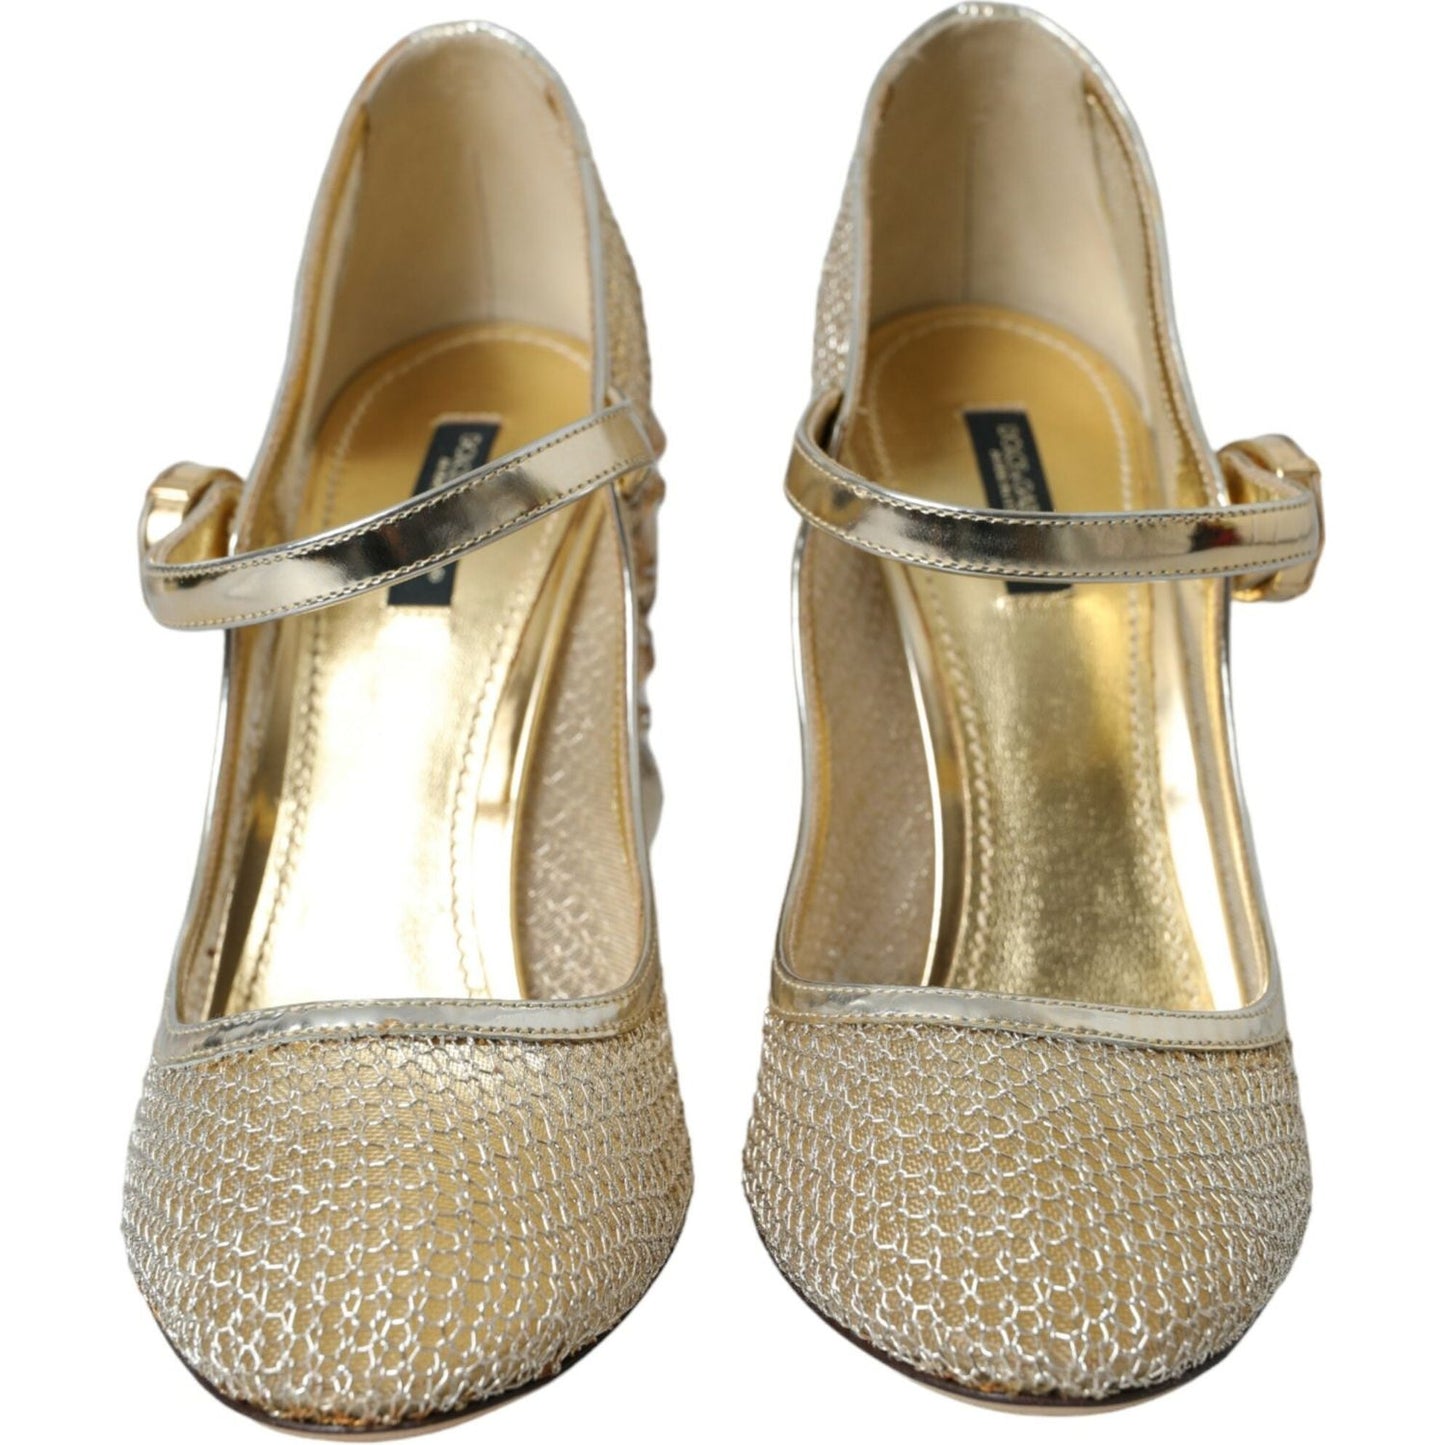 Dolce & Gabbana Gold Mesh Crystal Mary Jane Pumps Heels Shoes gold-mesh-crystal-mary-jane-pumps-heels-shoes